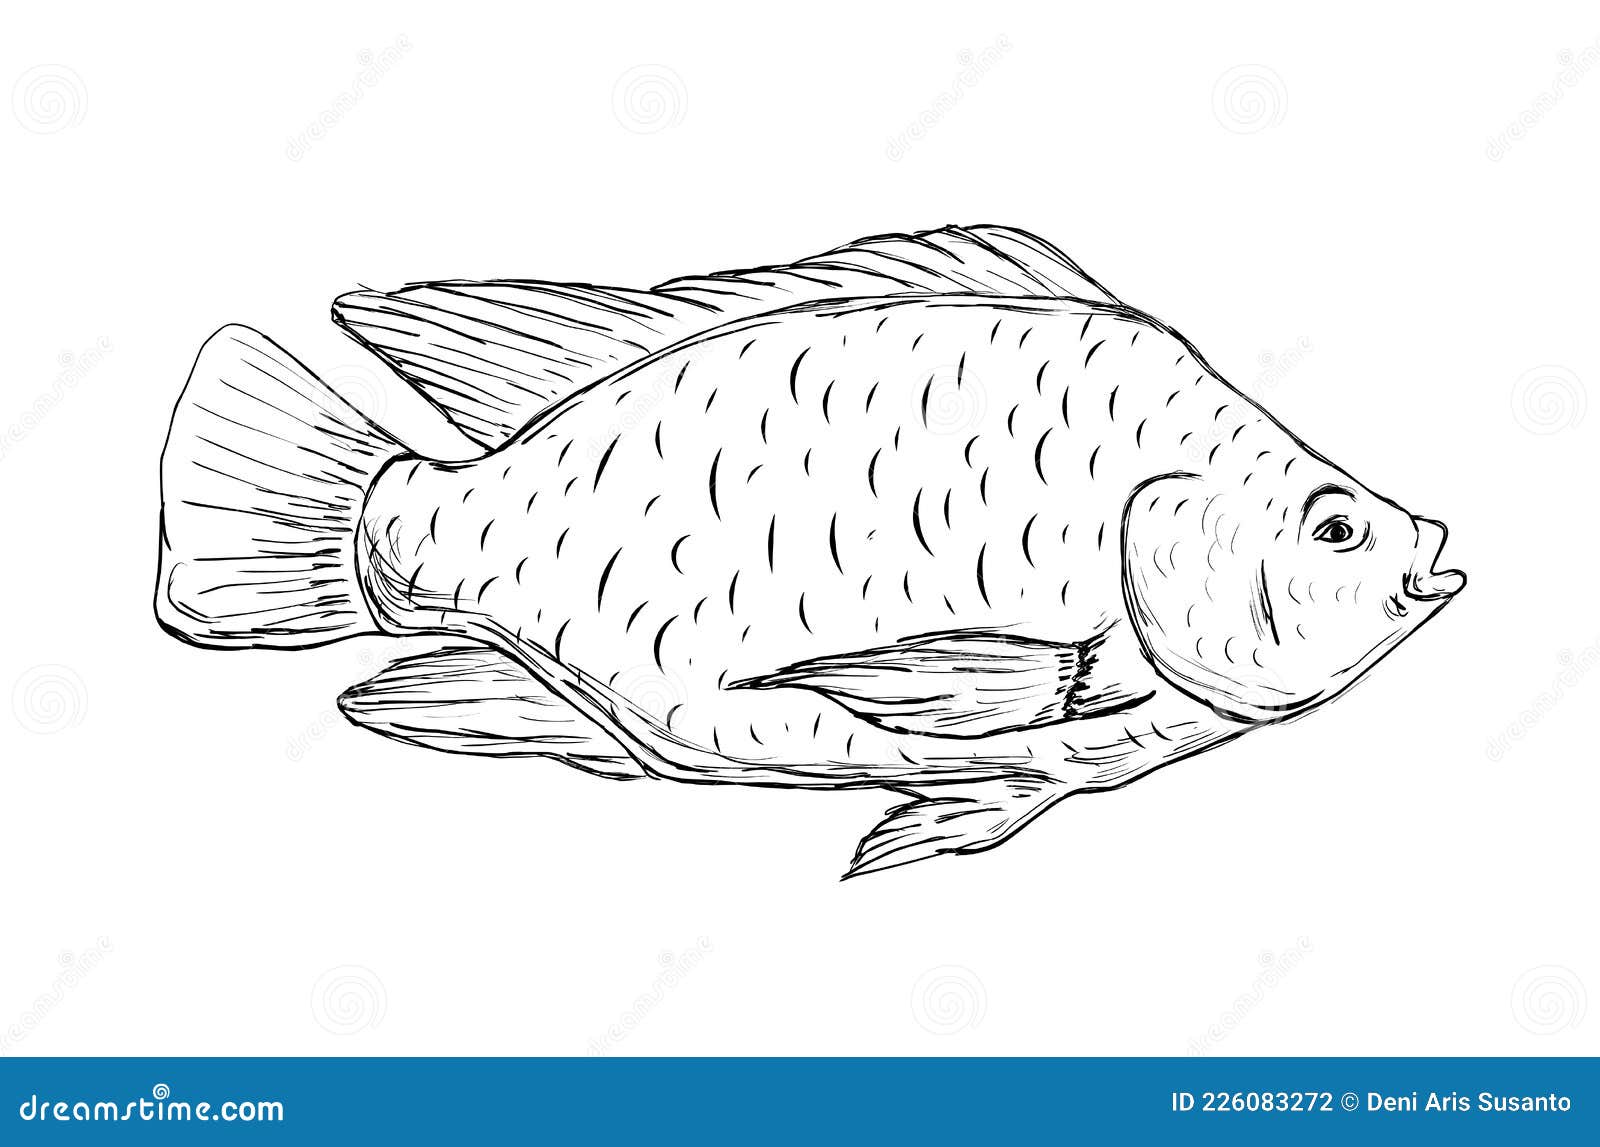 Fish: Tilapia. Biology teaching notes and drawings by D G Mackean